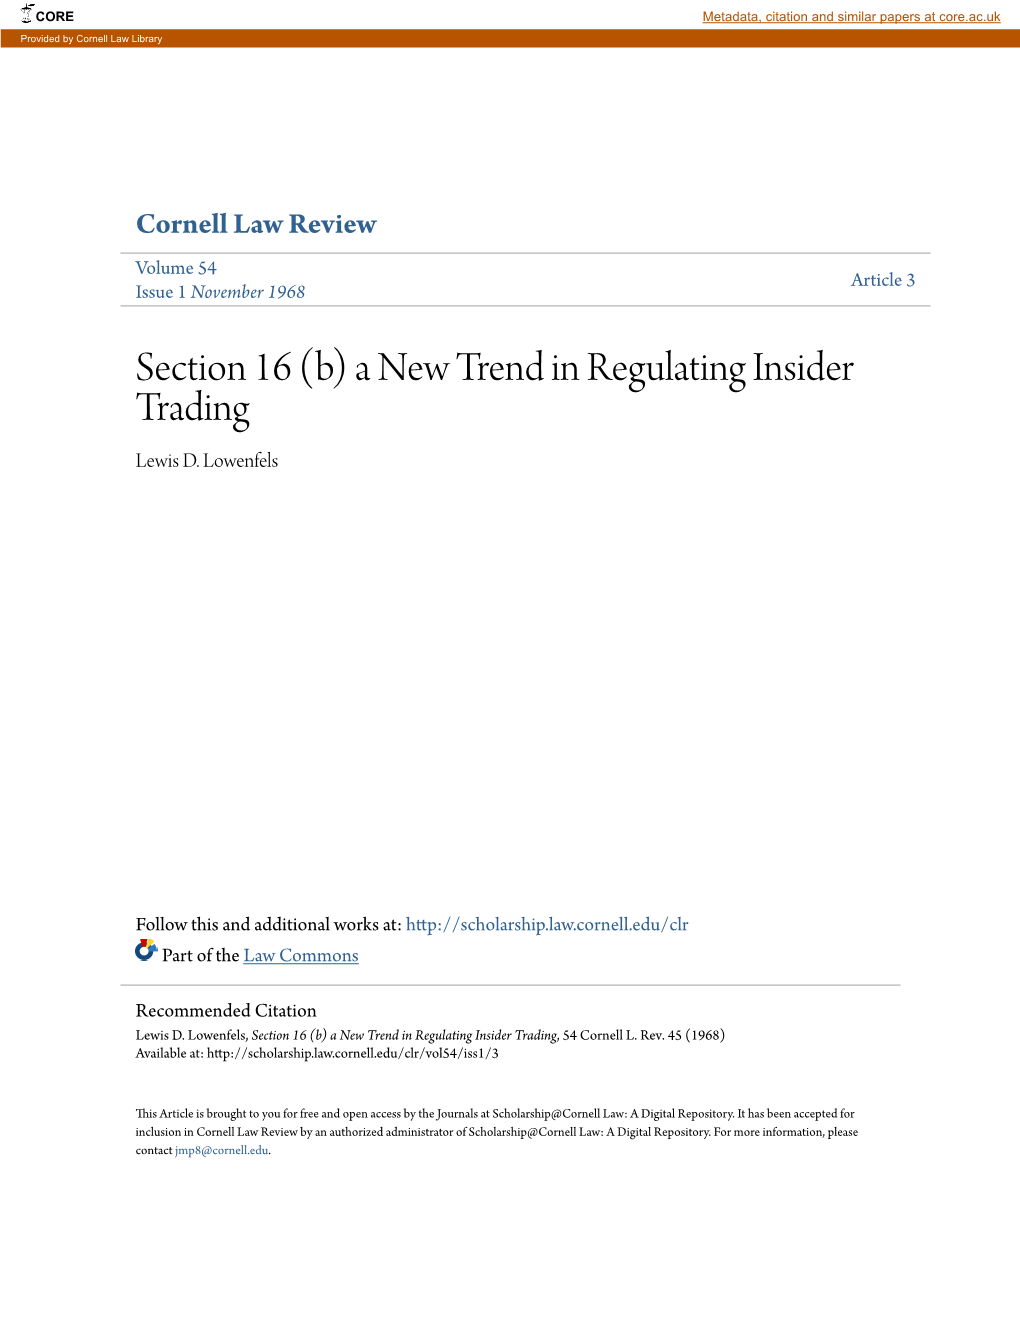 Section 16 (B) a New Trend in Regulating Insider Trading Lewis D